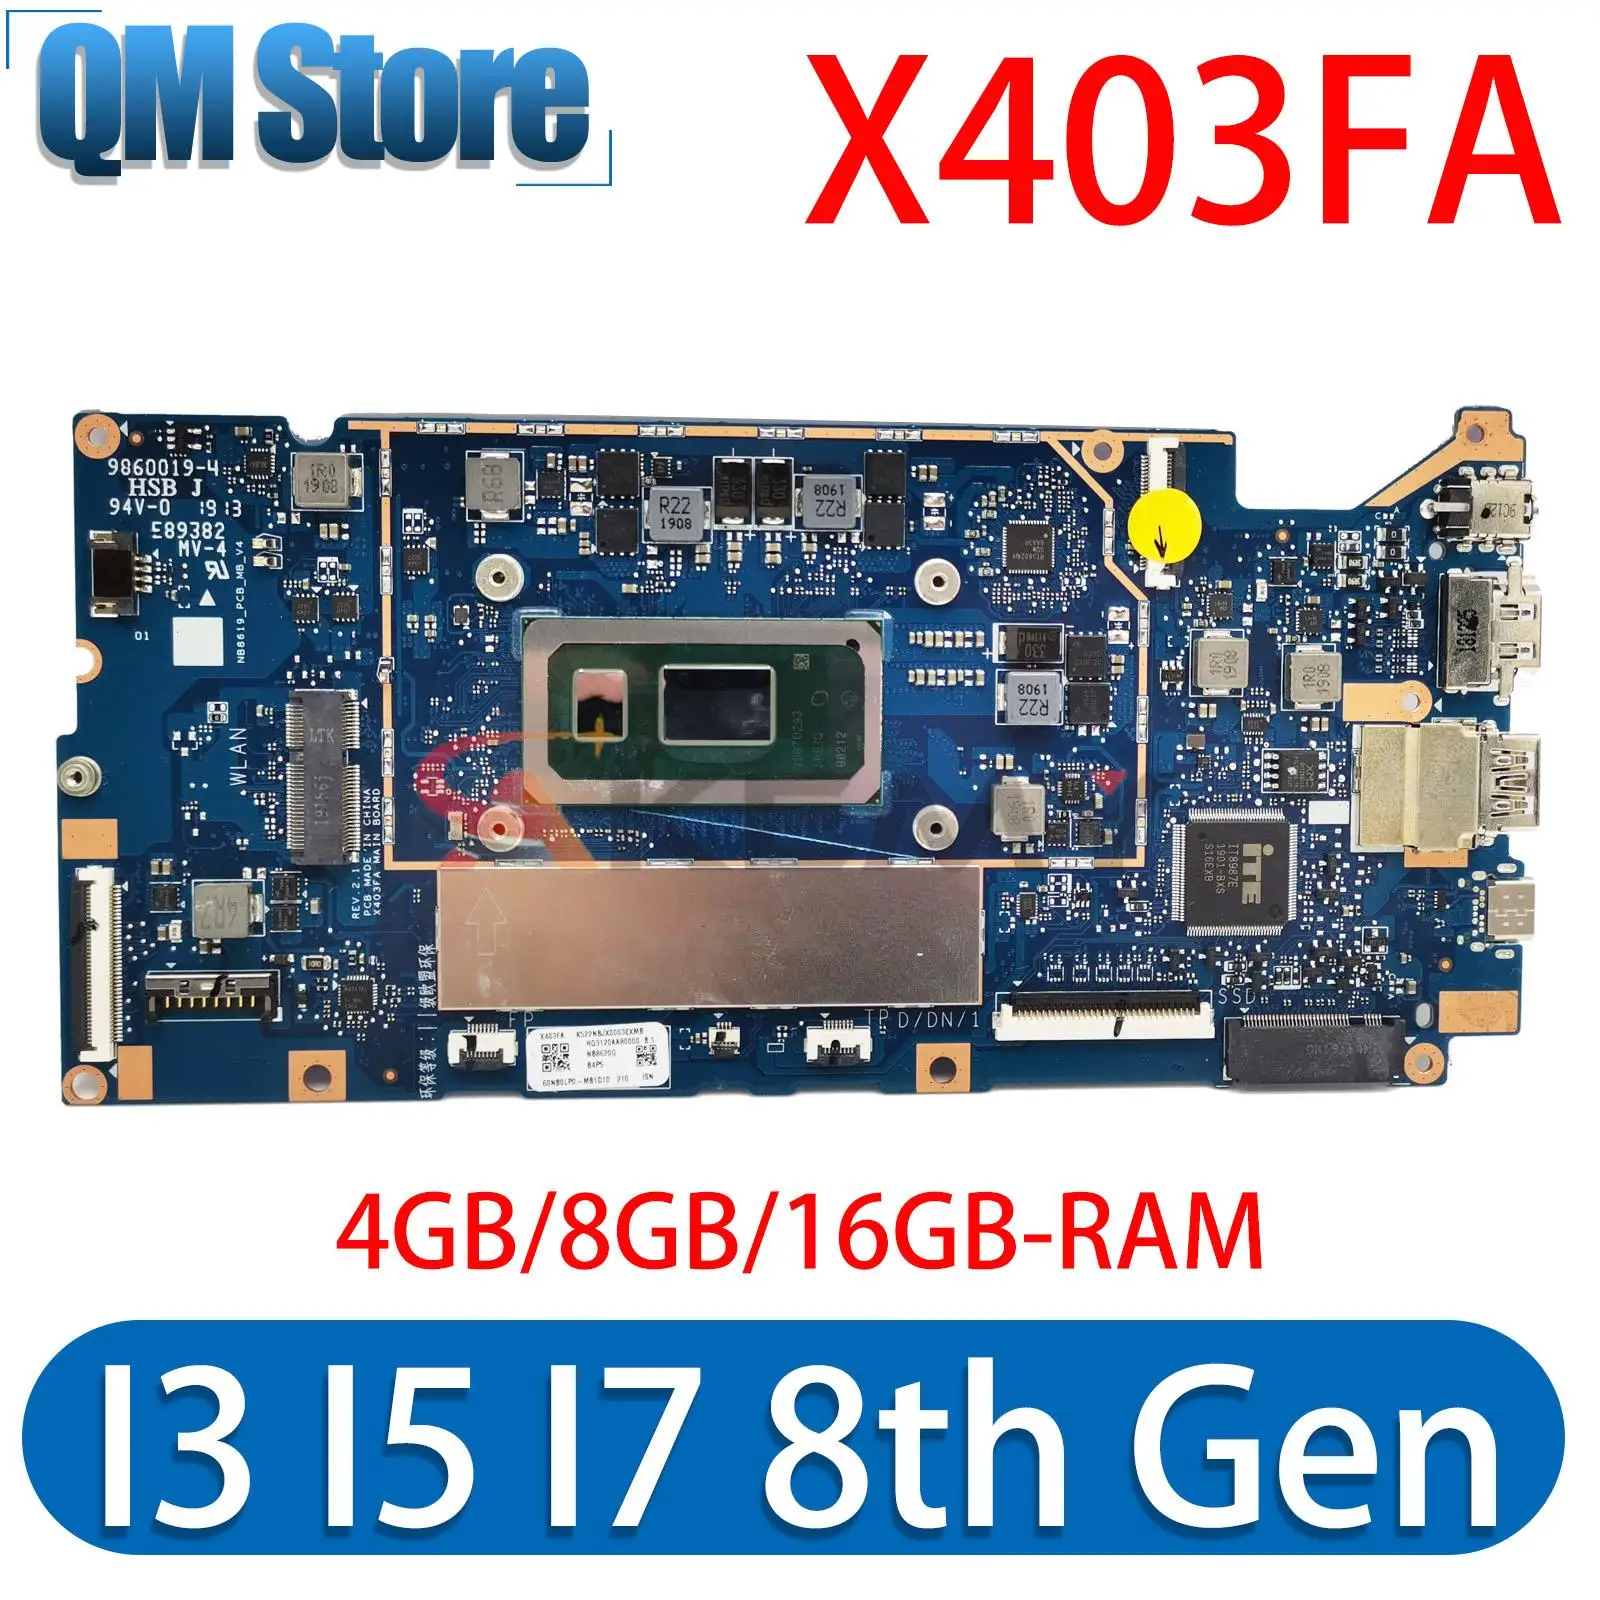 

Notebook X403FA Mainboard For ASUS VivoBook X403F X403 L403FA L403FAC X403FAC Laptop Motherboard I3 I5 I7 4G or 8G or 16G